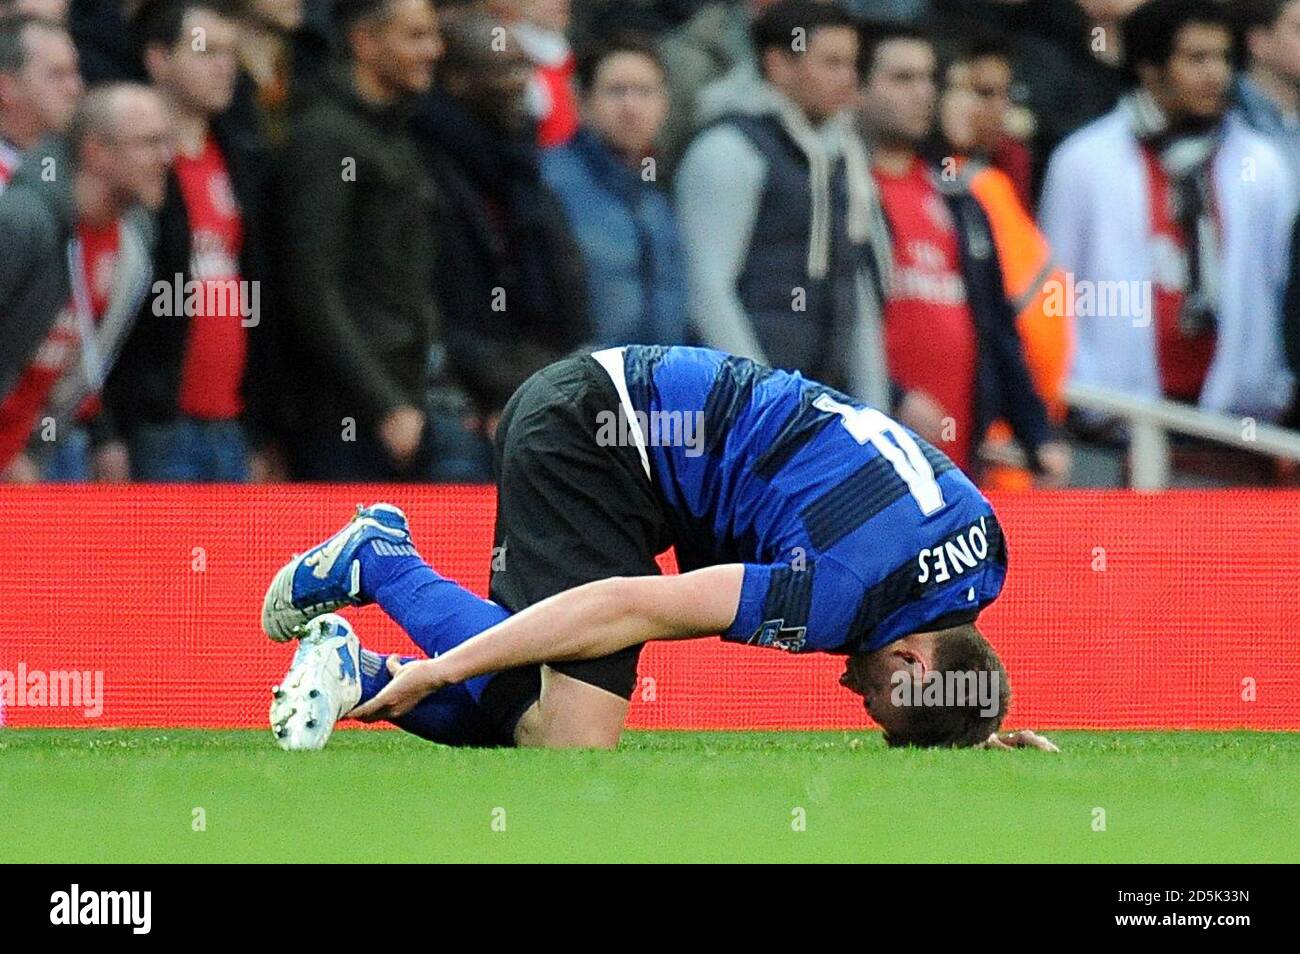 Manchester United's Phil Jones holds his ankle as he lies injured on the pitch before being substituted off  Stock Photo